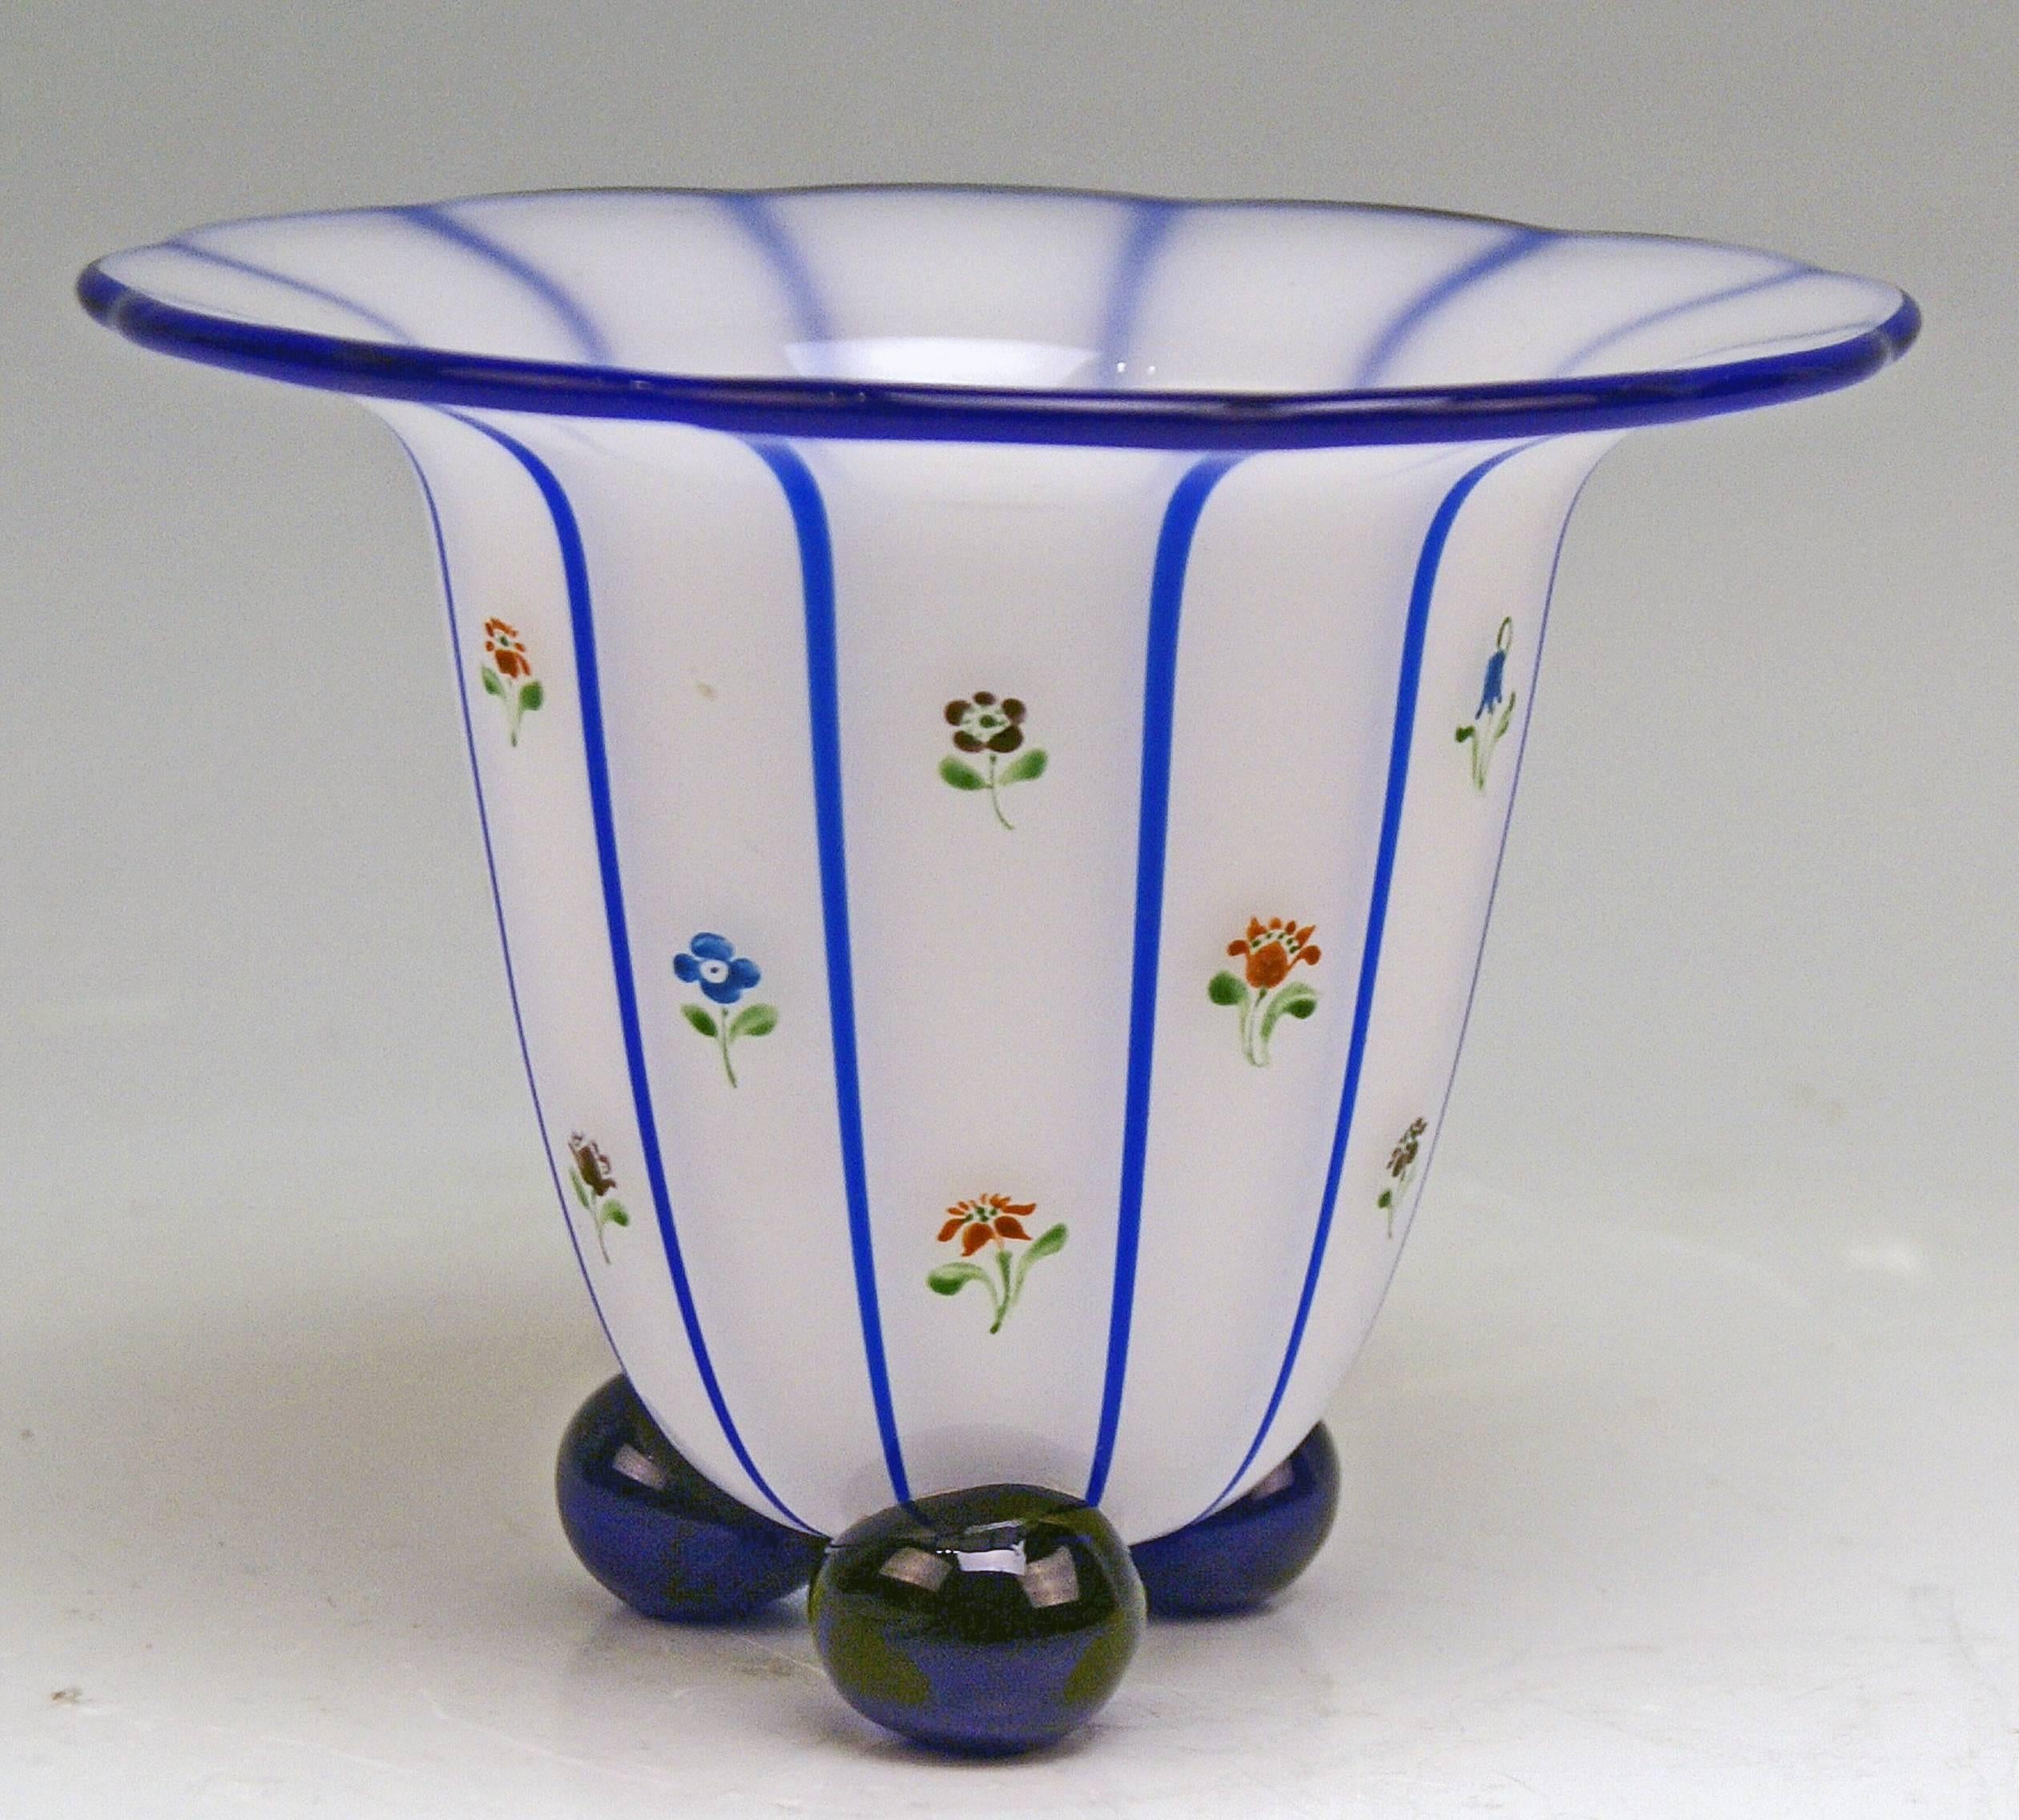 Vase Loetz (Lötz) Widow Klostermuehle Bohemia Art Nouveau

Striped pattern once created by Michael Powolny (1871 - 1954) in year 1914, on behalf of the so-said Werkbund.
This vase presented here is a variant of Powolny's design made by Loetz